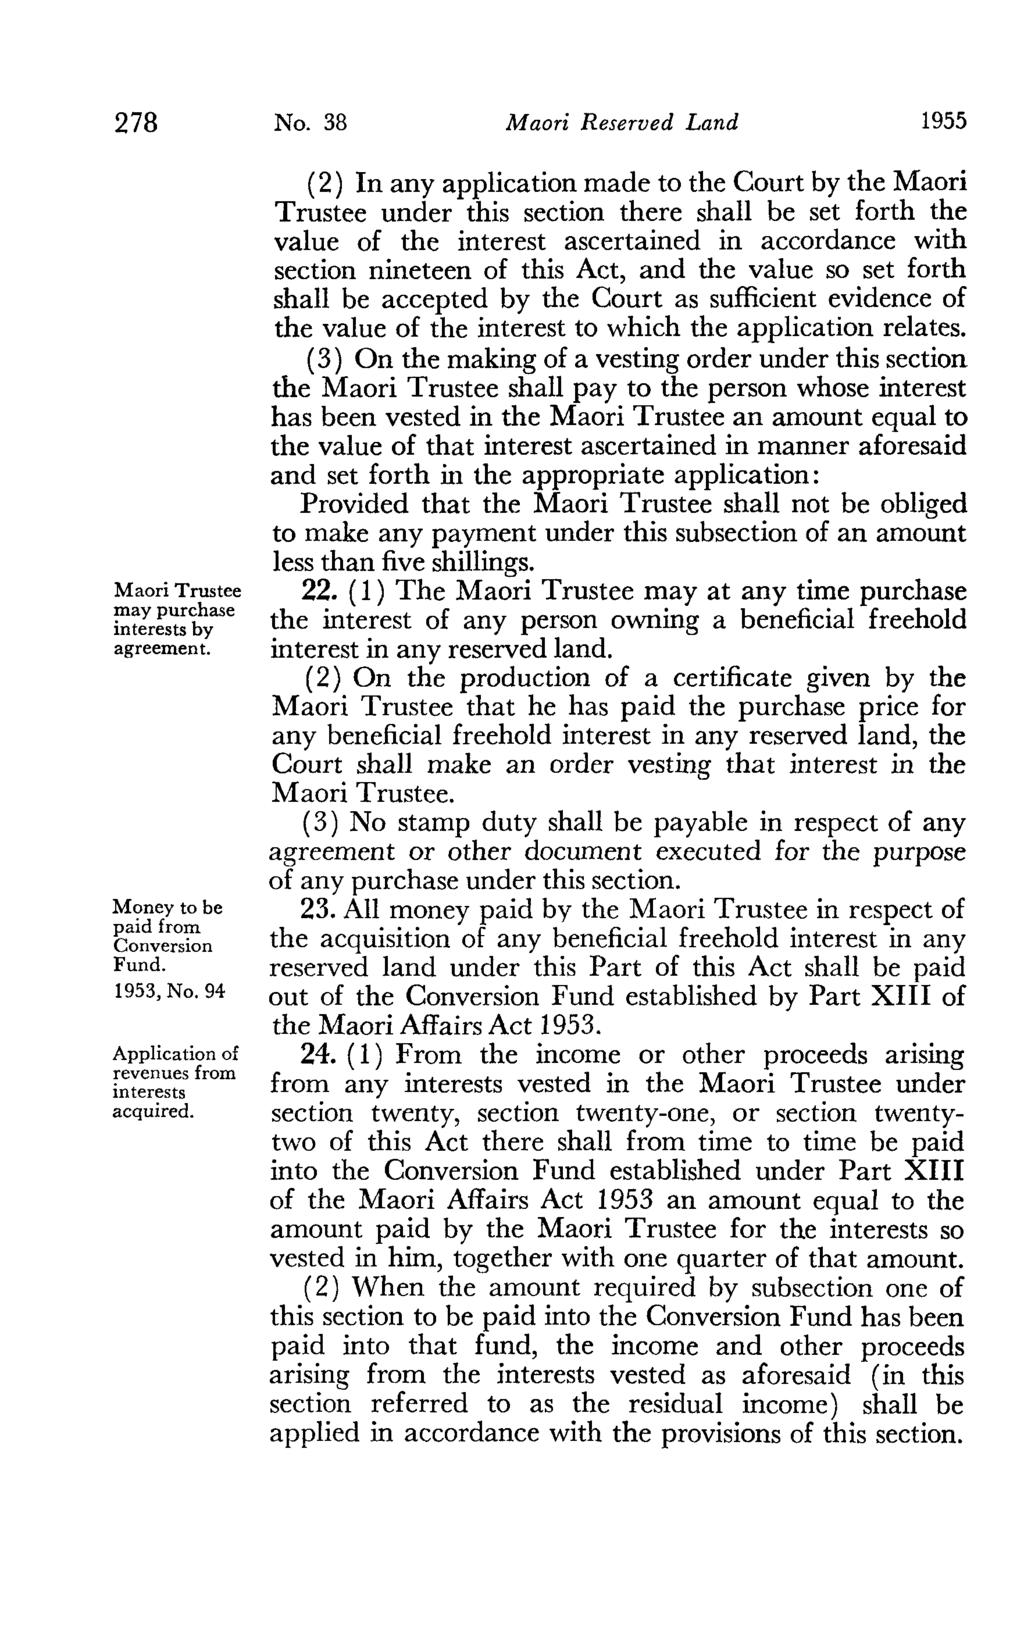 278 Maori Trustee may purchase in teres ts by agreement. Money to be paid from Conversion Fund. 1953, No.